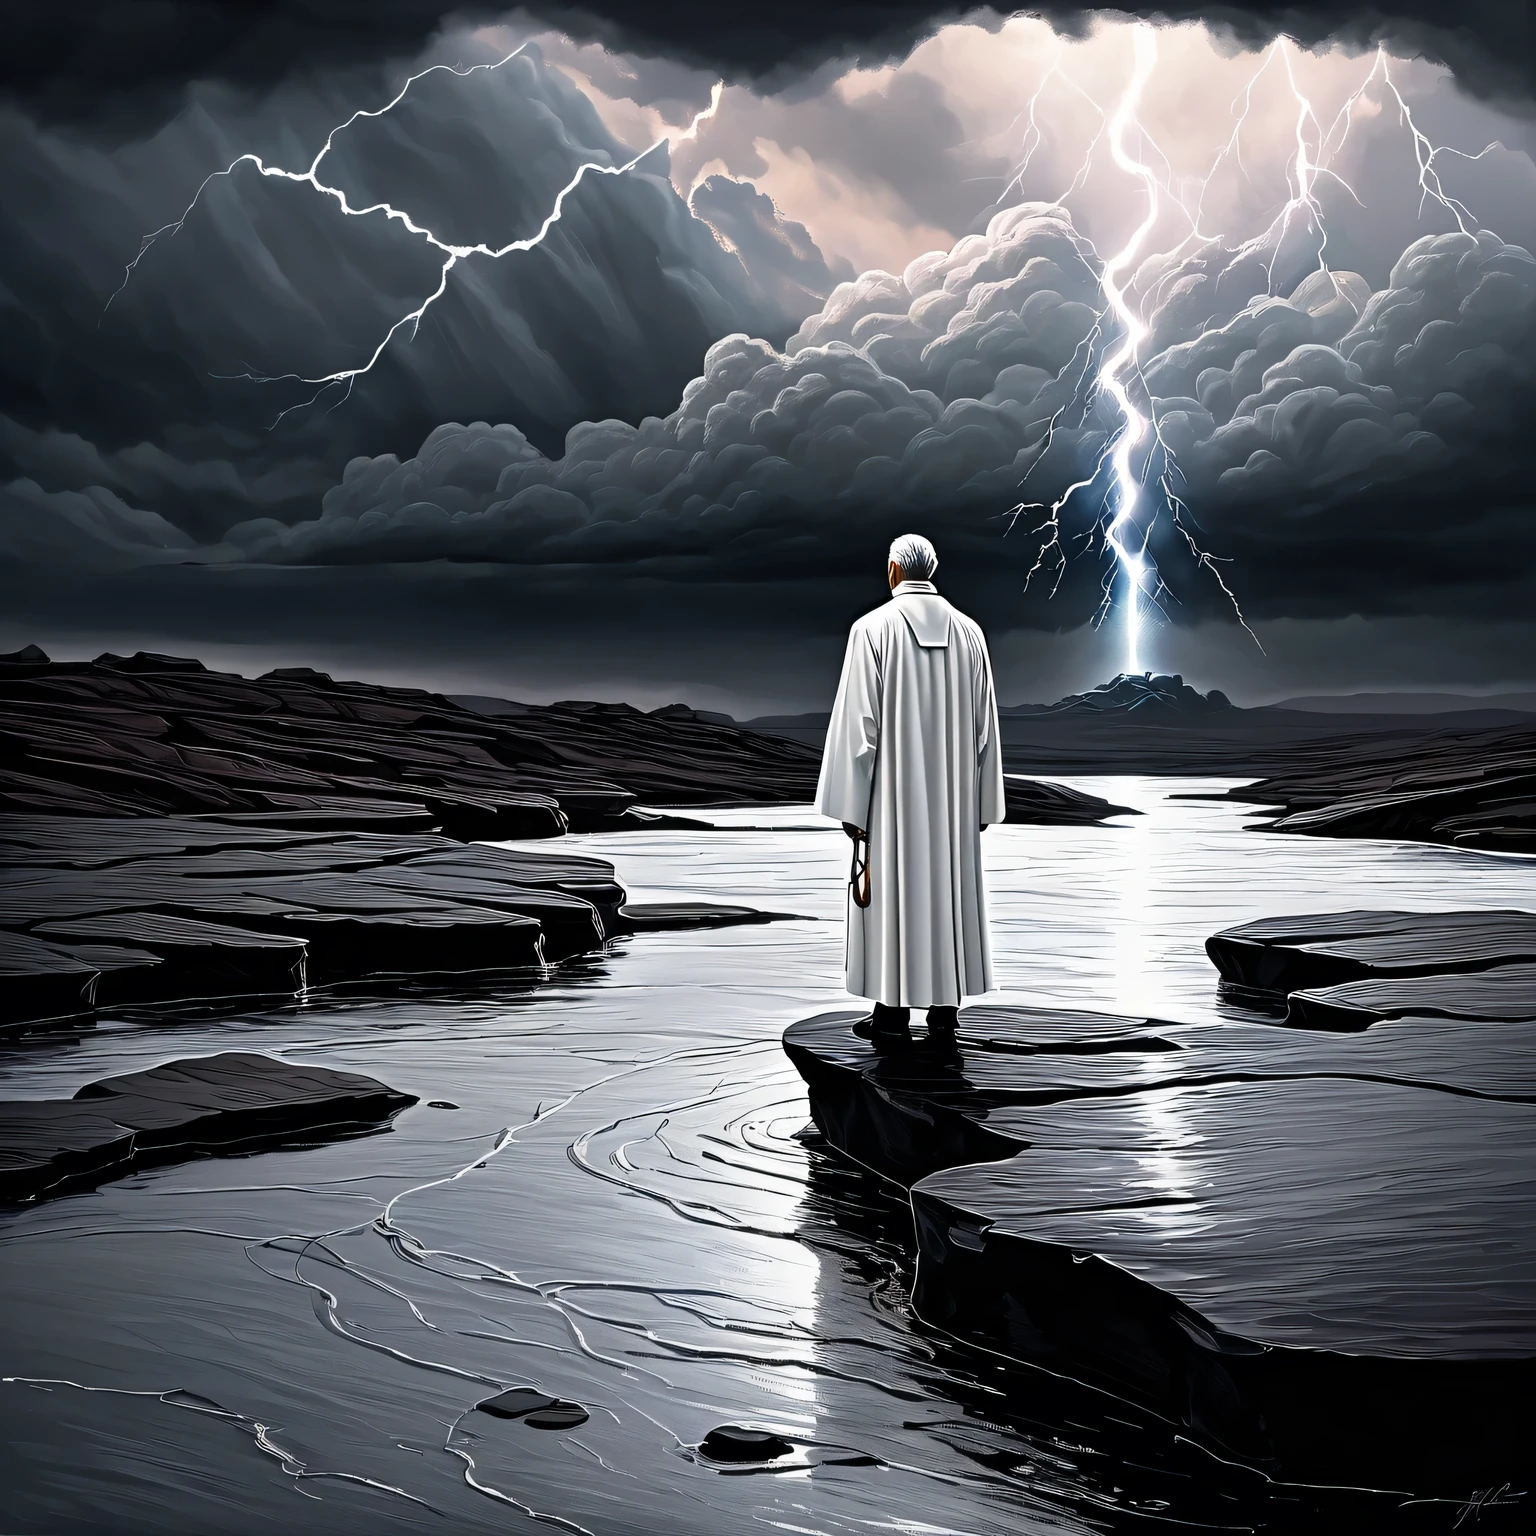 ((Liquid Metal Art)), the painting is painted with liquid metal on textured paper and depicts a beautiful minimalistic landscape with a White Priest of Light standing on a  rock, Liquid Metal White Priest of Light looks ominous and gloomy, in the background a gloomy sky with clouds and lightning, the painting is made of liquid metal, Metal, the work of a master, clear contours, 32 carats